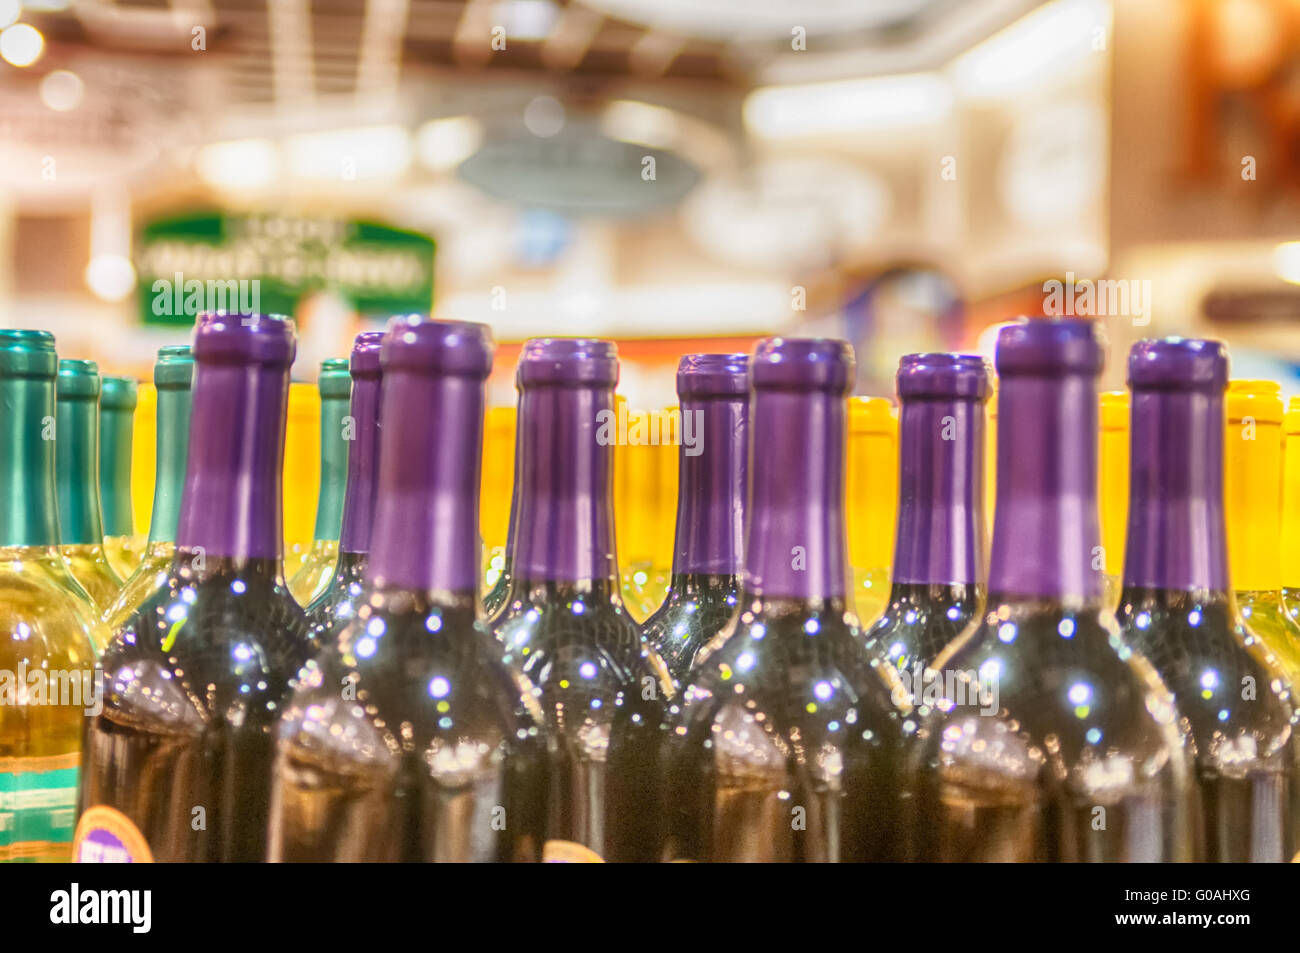 Bottles of wine shot with limited depth of field Stock Photo